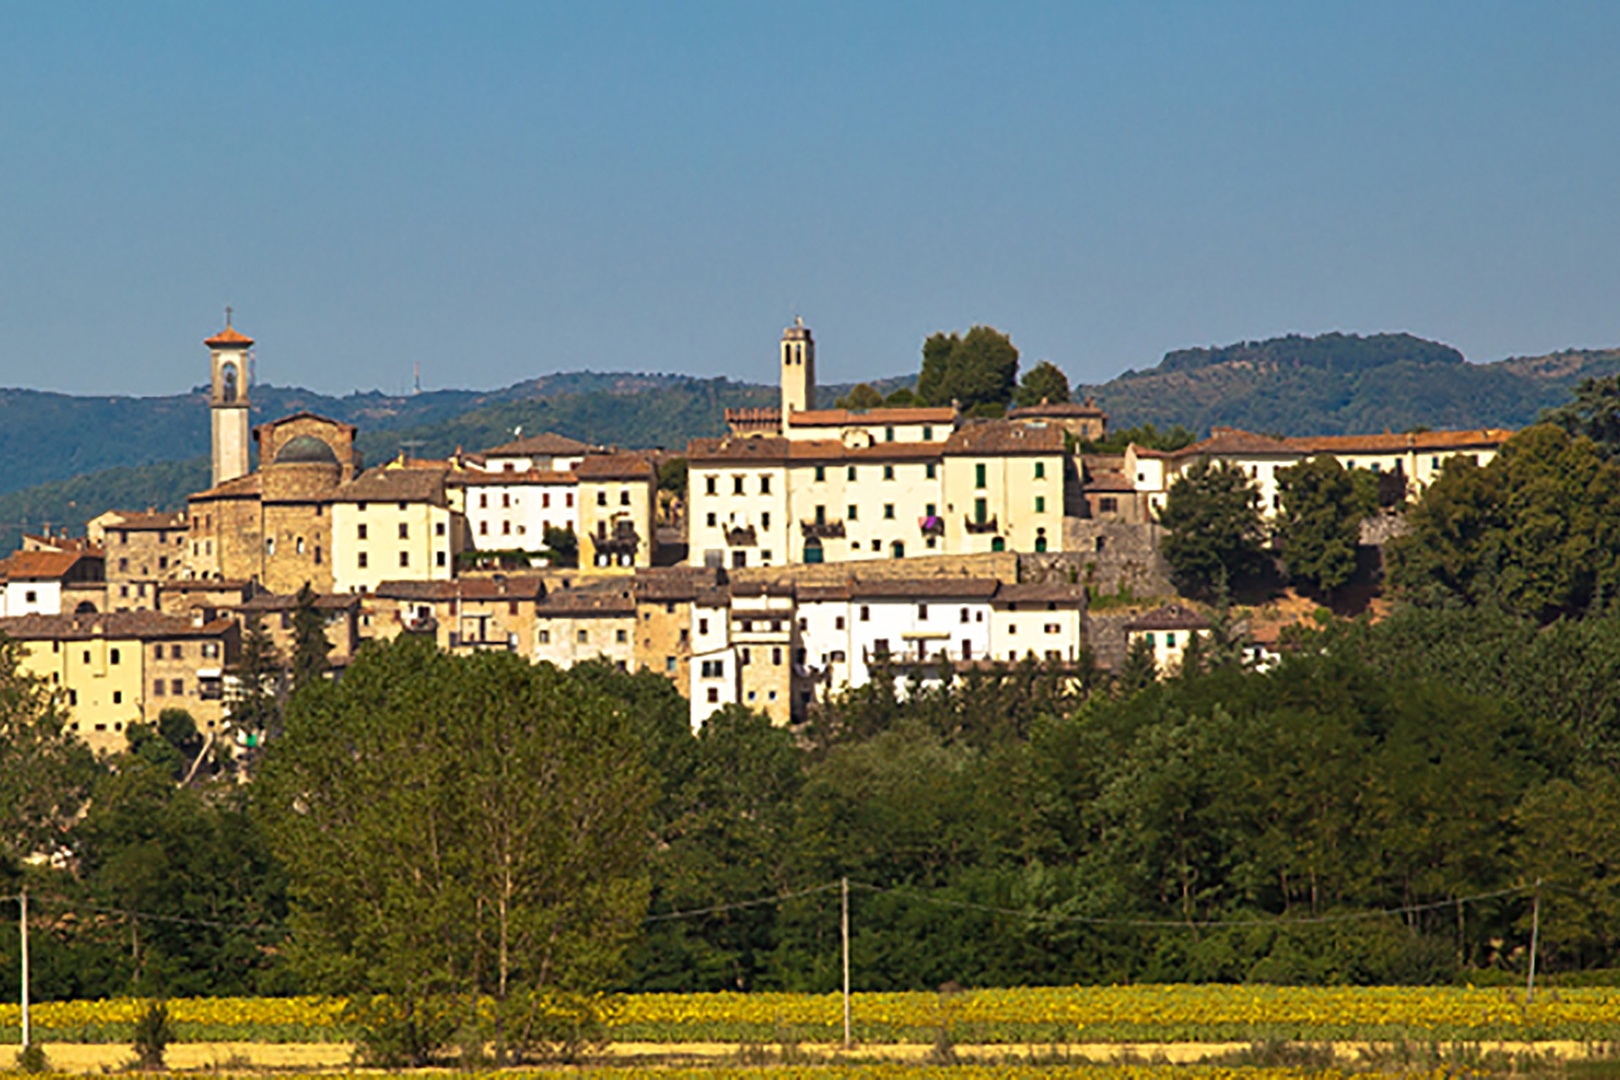 The village of Monterchi is just 2 miles away, with shops, grocery store and restaurants.